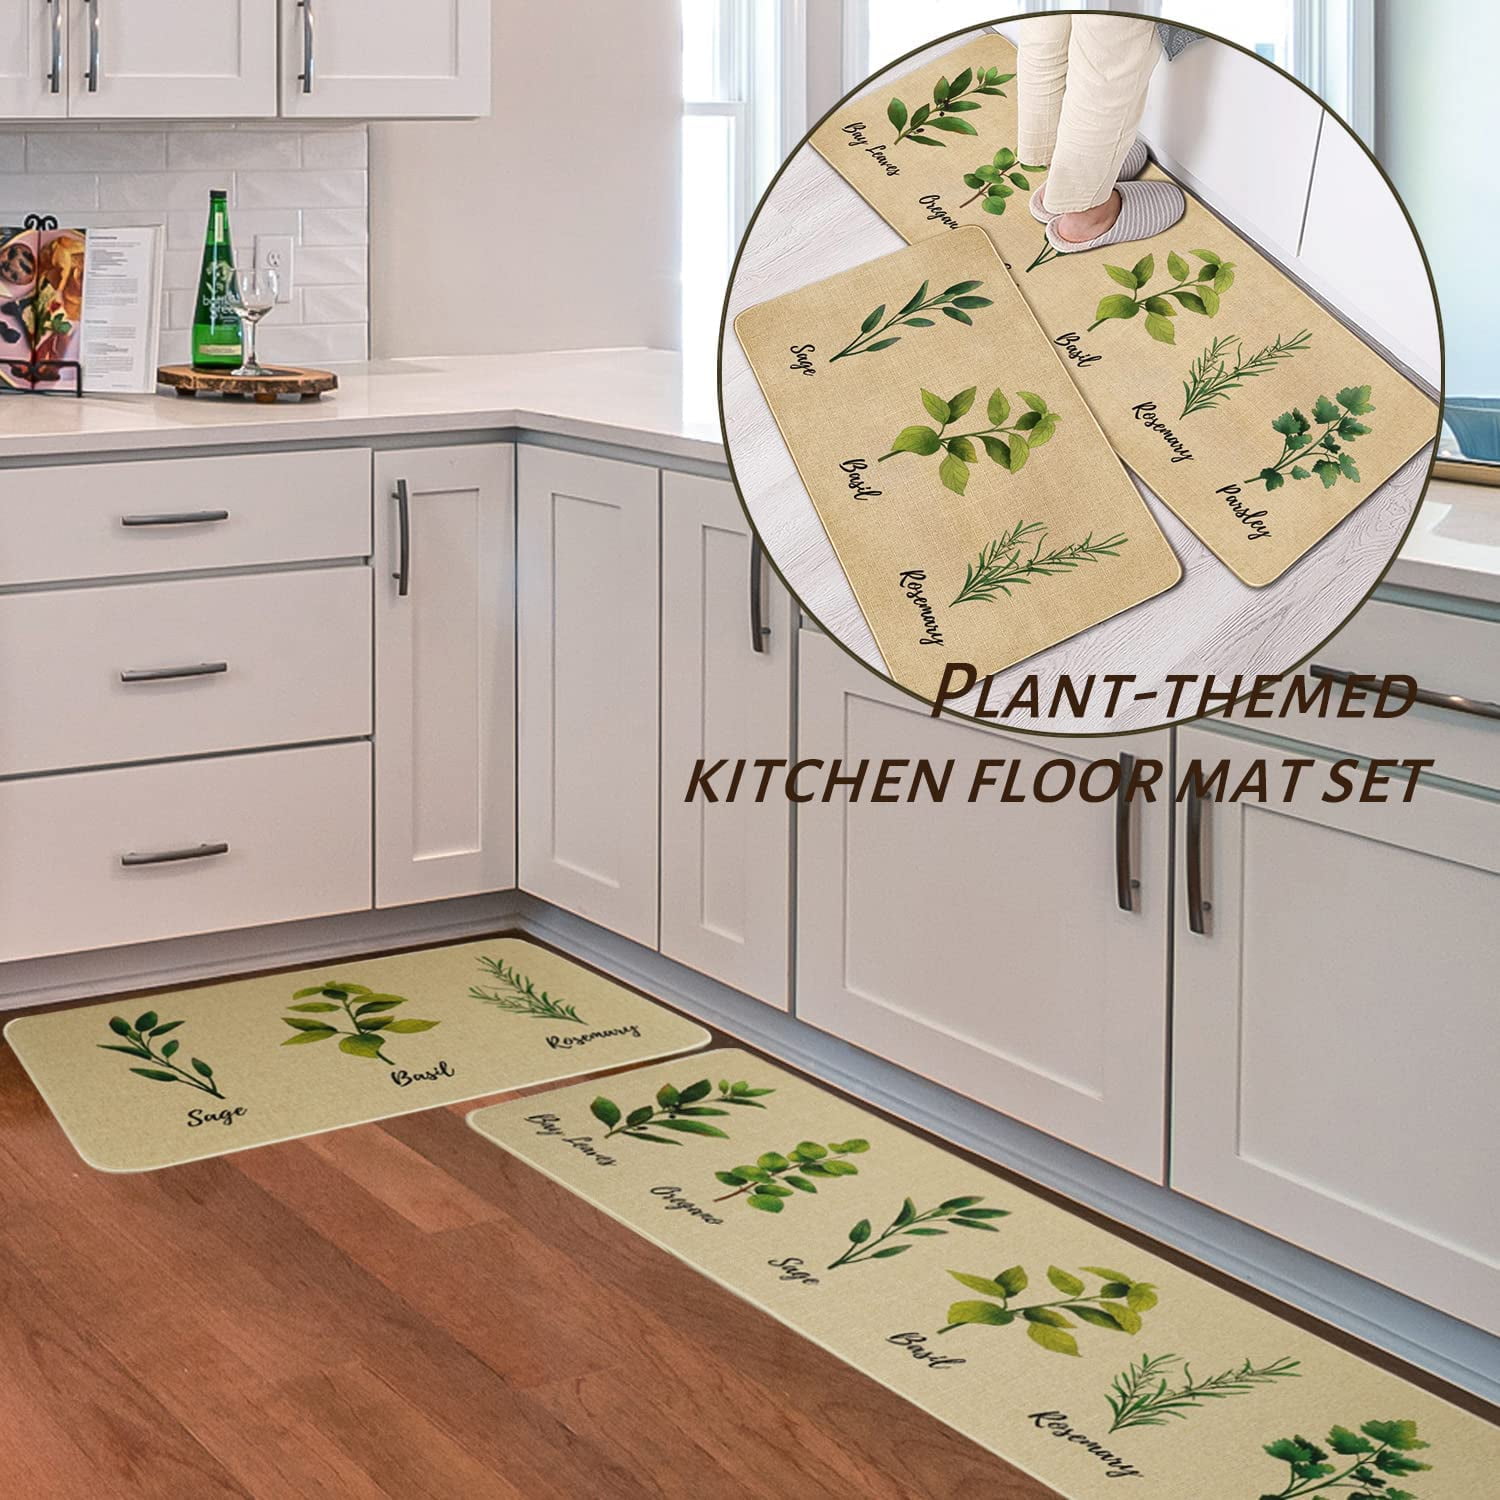 Artoid Mode Parsley Sage Oregano Basil Bay Leaves Decorative Kitchen Mats  Set of 2, Seasonal Holiday Party Low-Profile Floor Mat for Home Kitchen -  17x29 and 17…